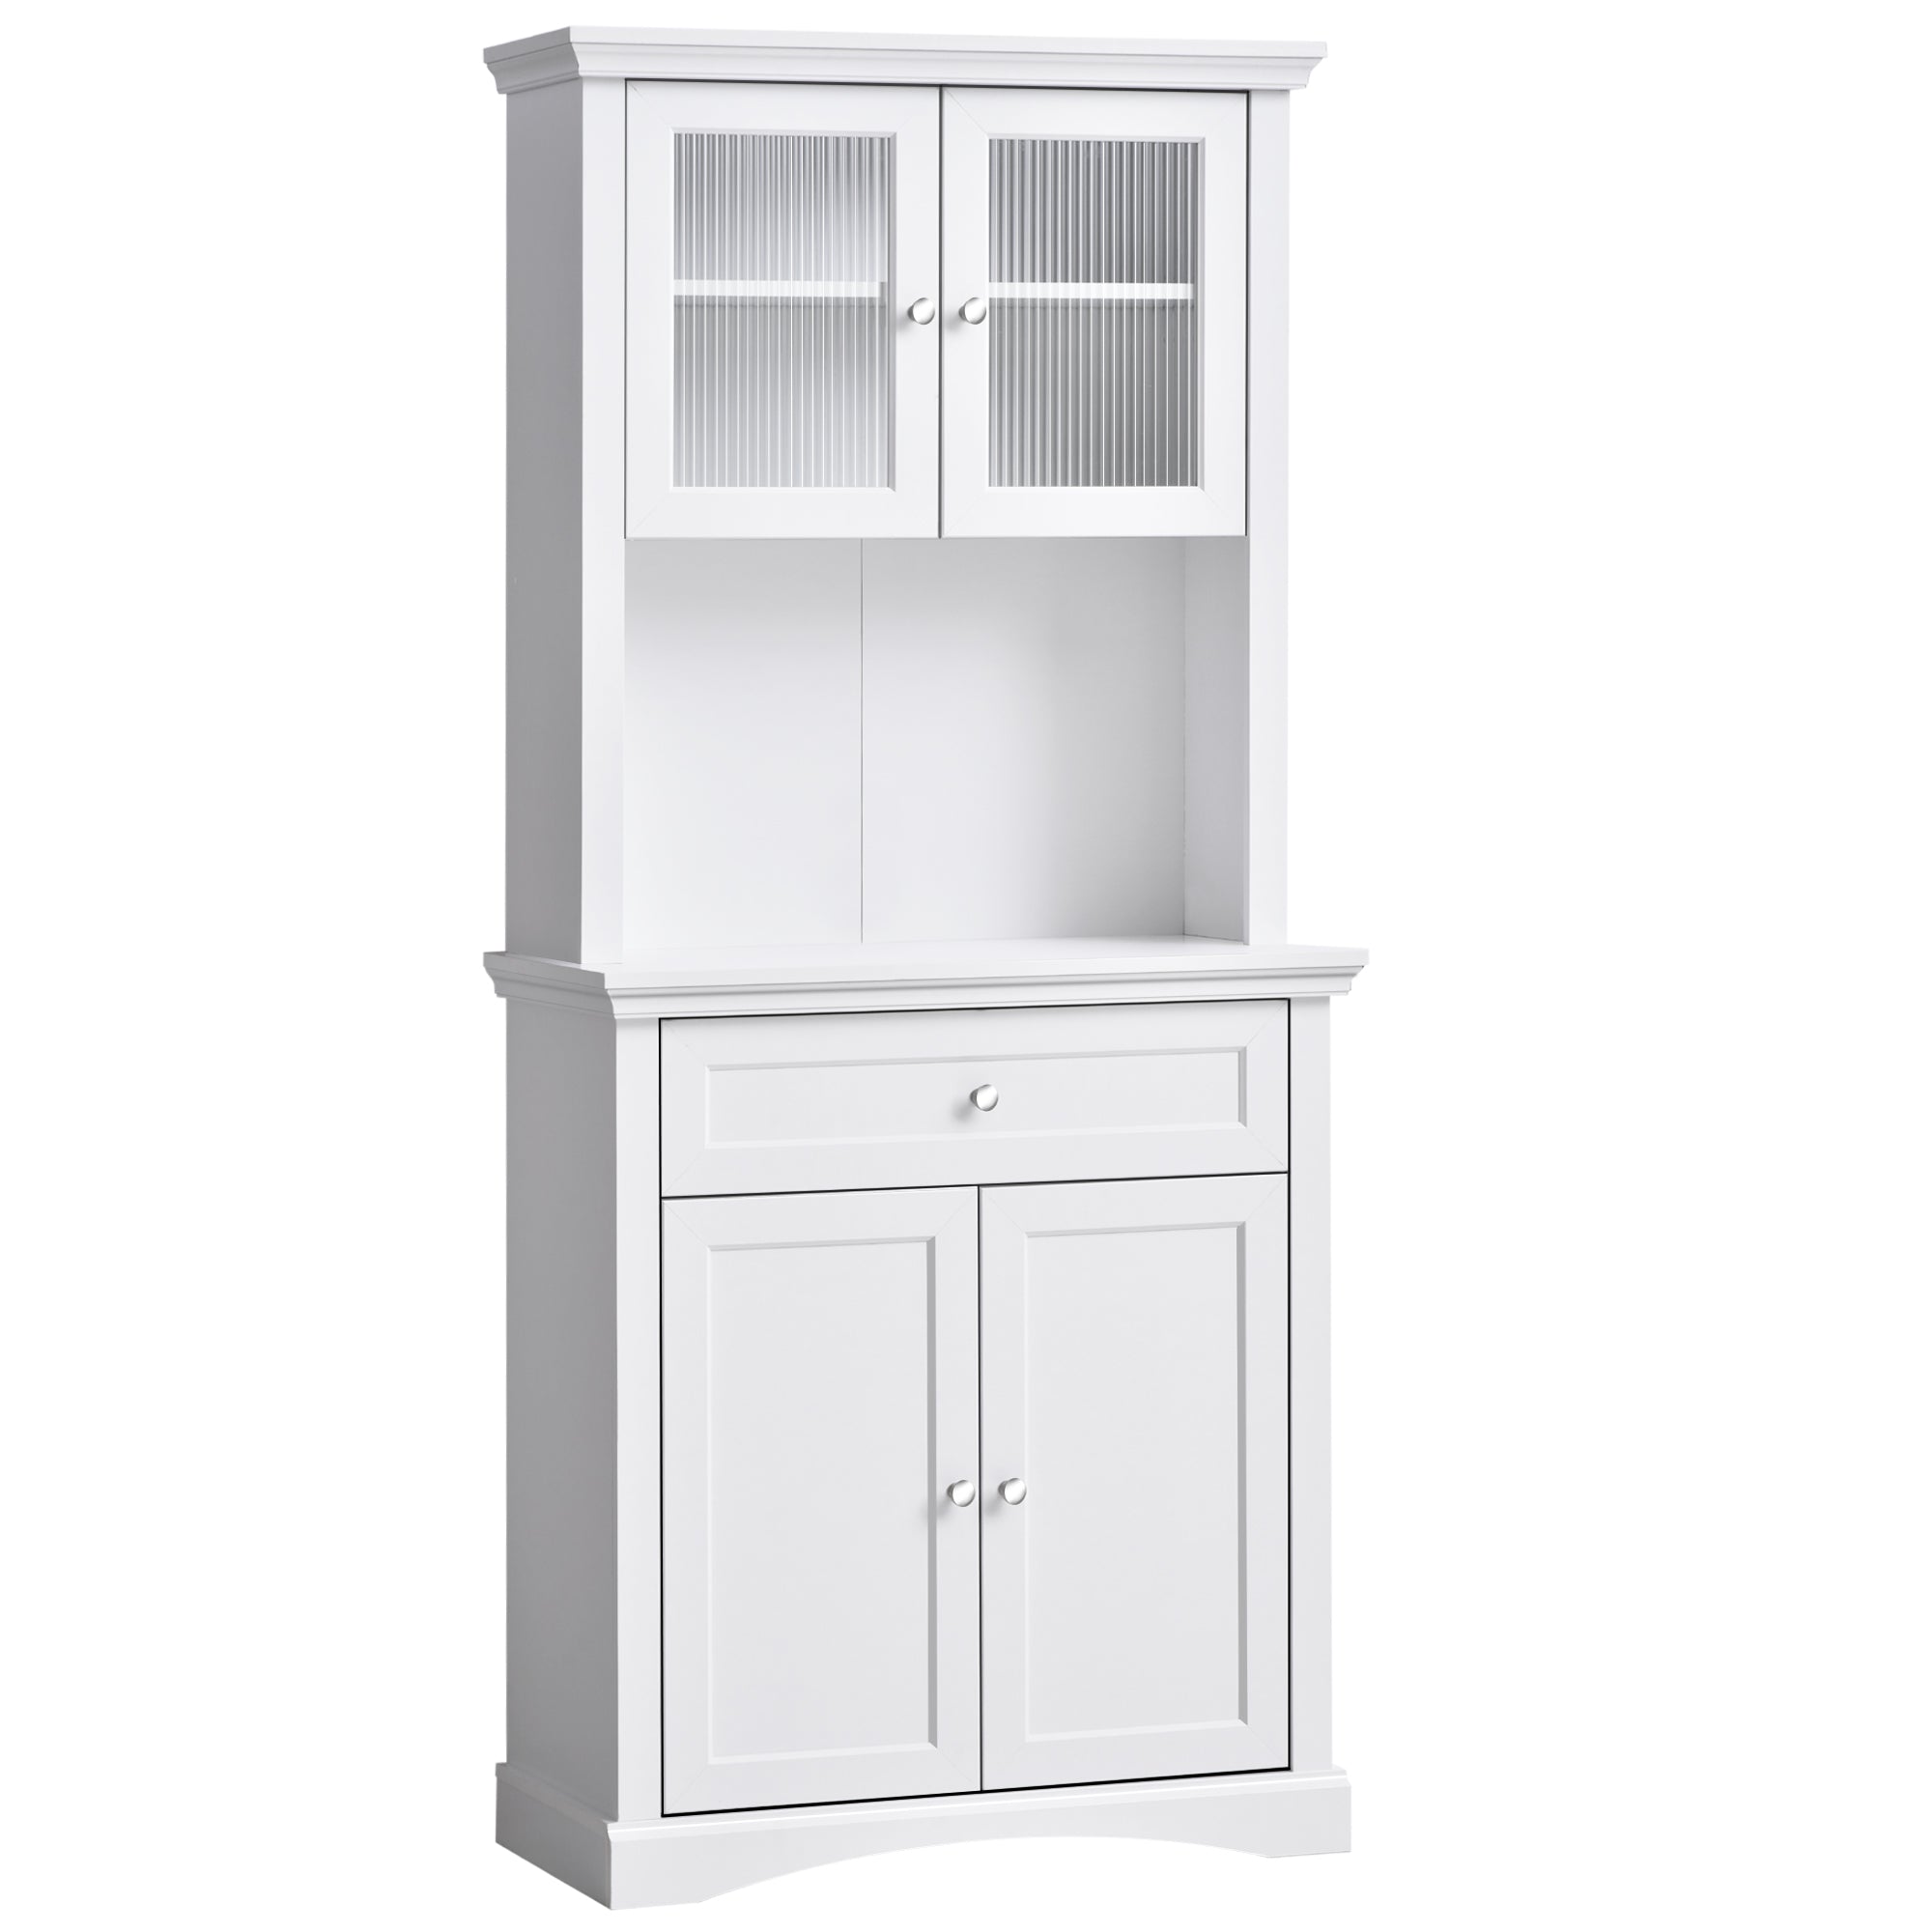 HOMCOM Kitchen Cupboard Storage Cabinet with Drawer - Doors and Shelves - White  | TJ Hughes